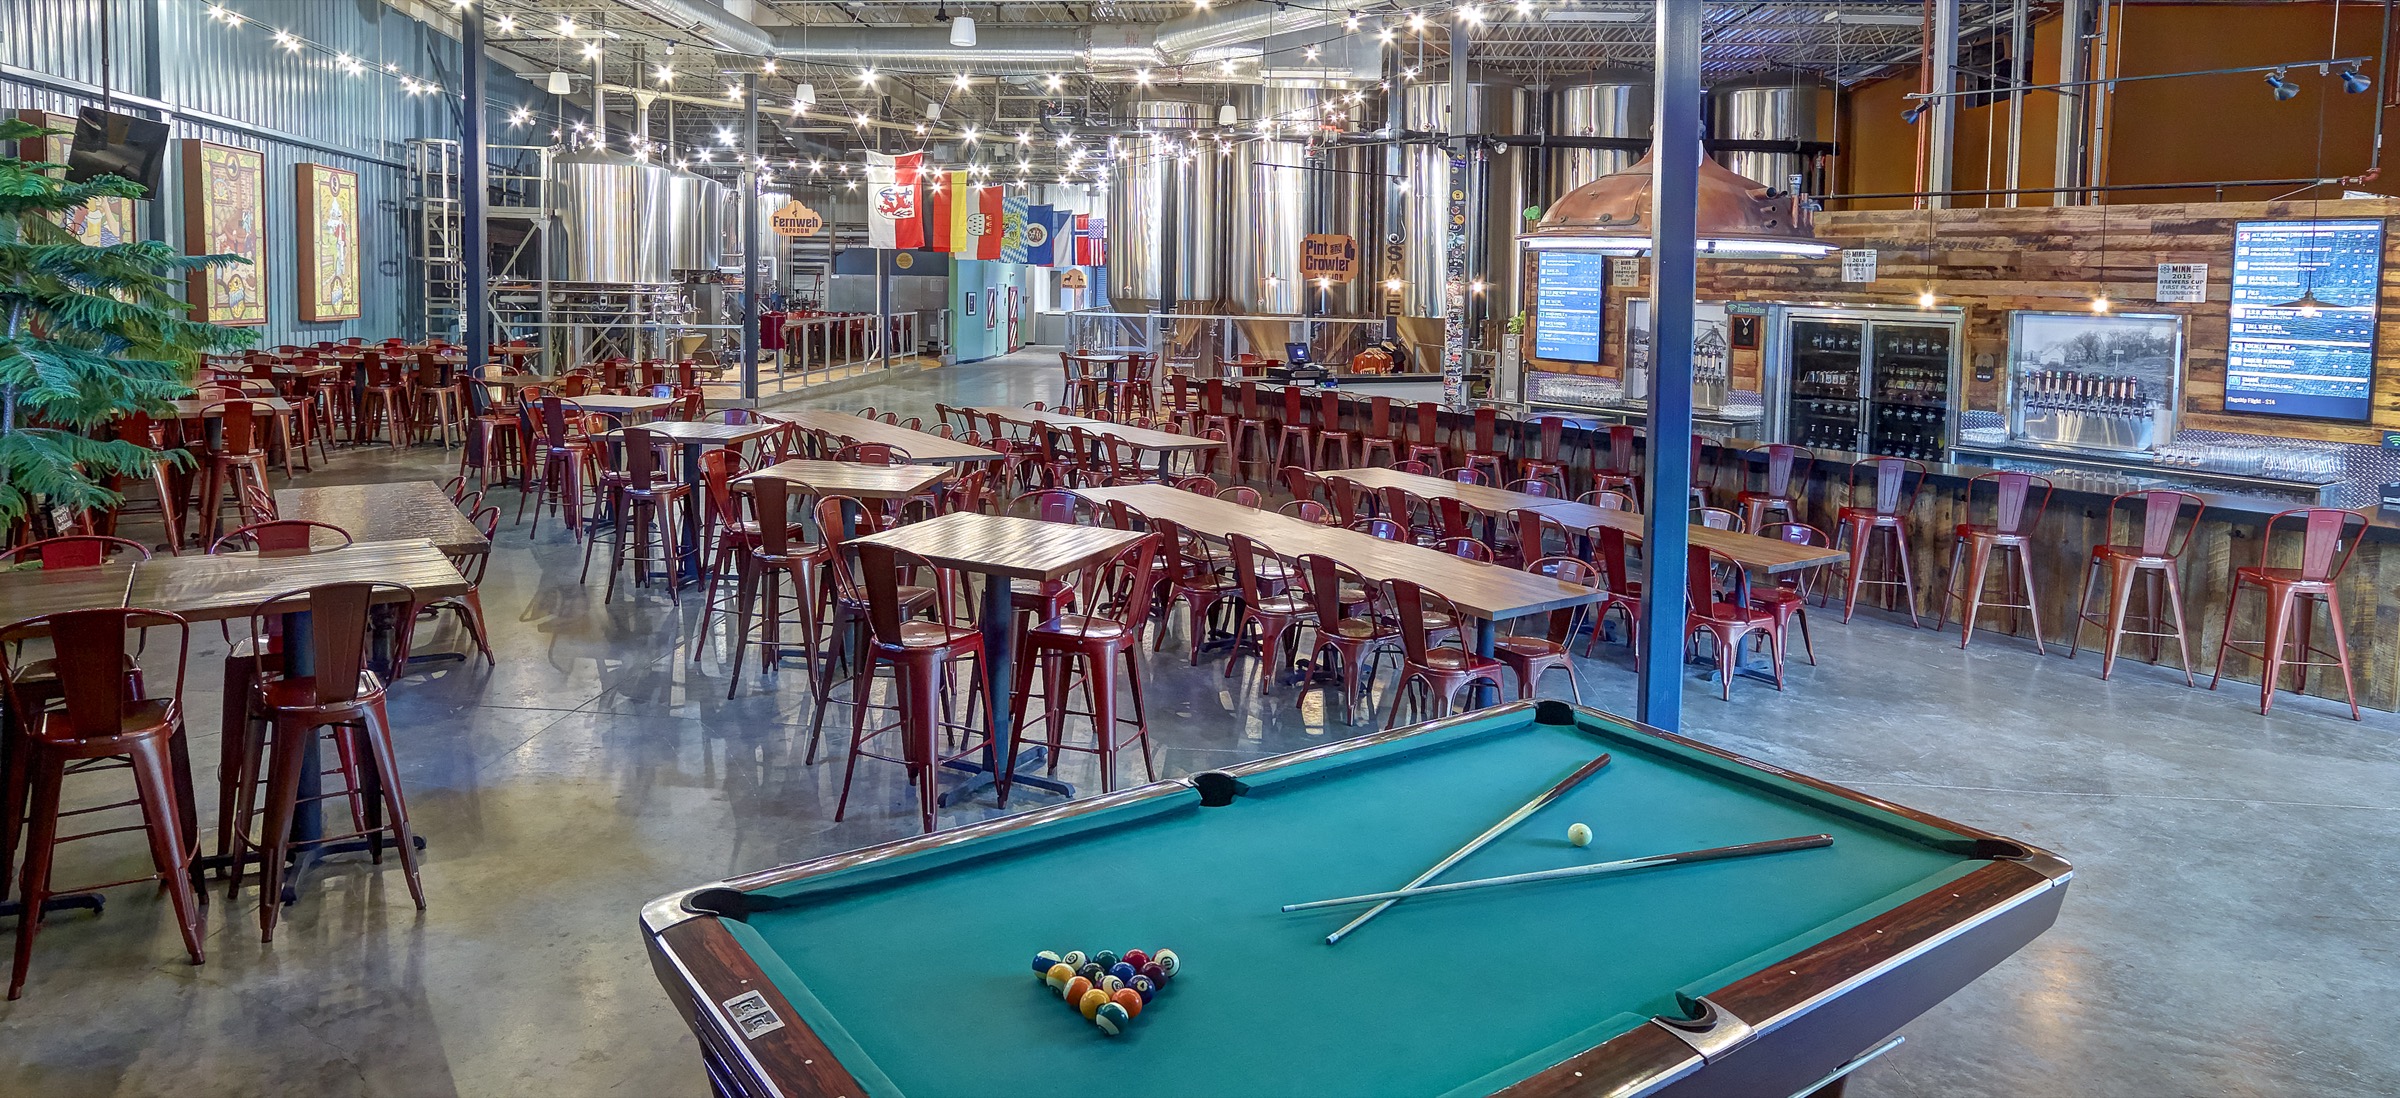 Interior view showing the Utepils Taproom